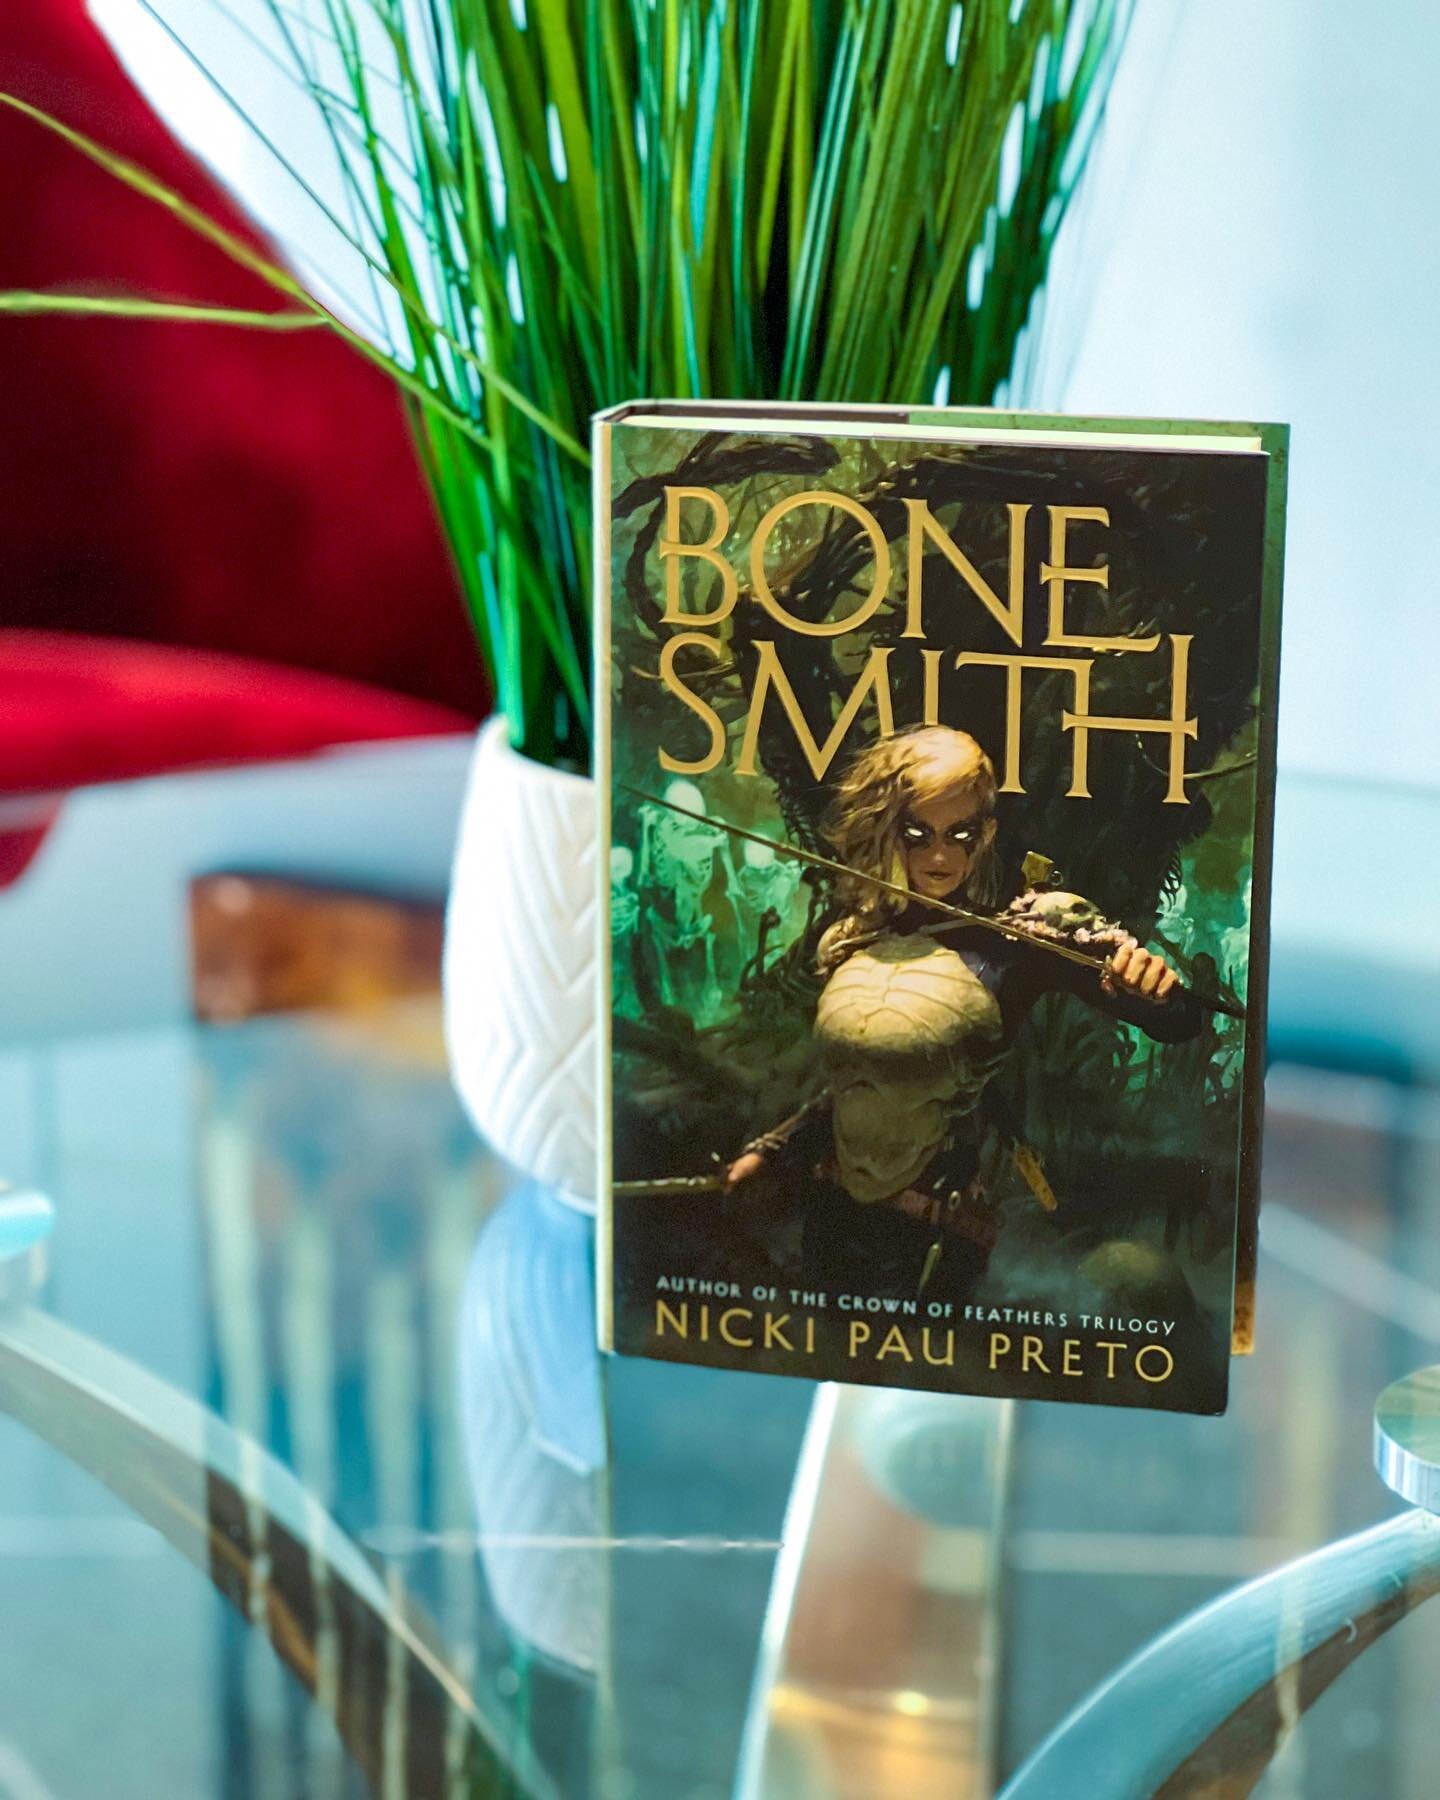 Happy book birthday to #Bonesmith ☠️ If you&rsquo;re looking for a spooky fantasy to curl up on the couch with, THIS IS THE BOOK! It has:

💀 Badass female lead
💀 Enemies to lovers
💀 Spooky Vibes
💀 Walking Dead 
 
and more!

#YAFantasy #Bookstagra